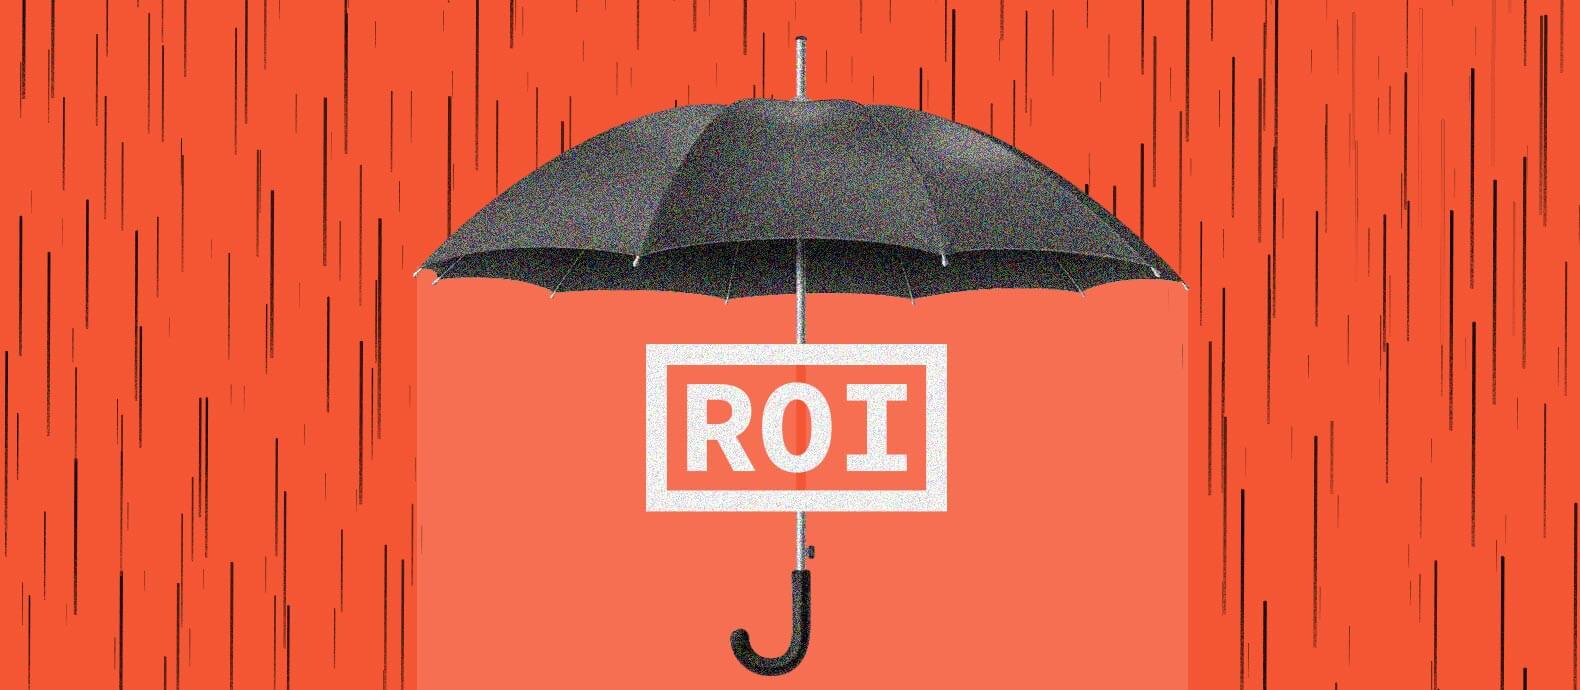 3 ways to measure your brand protection ROI